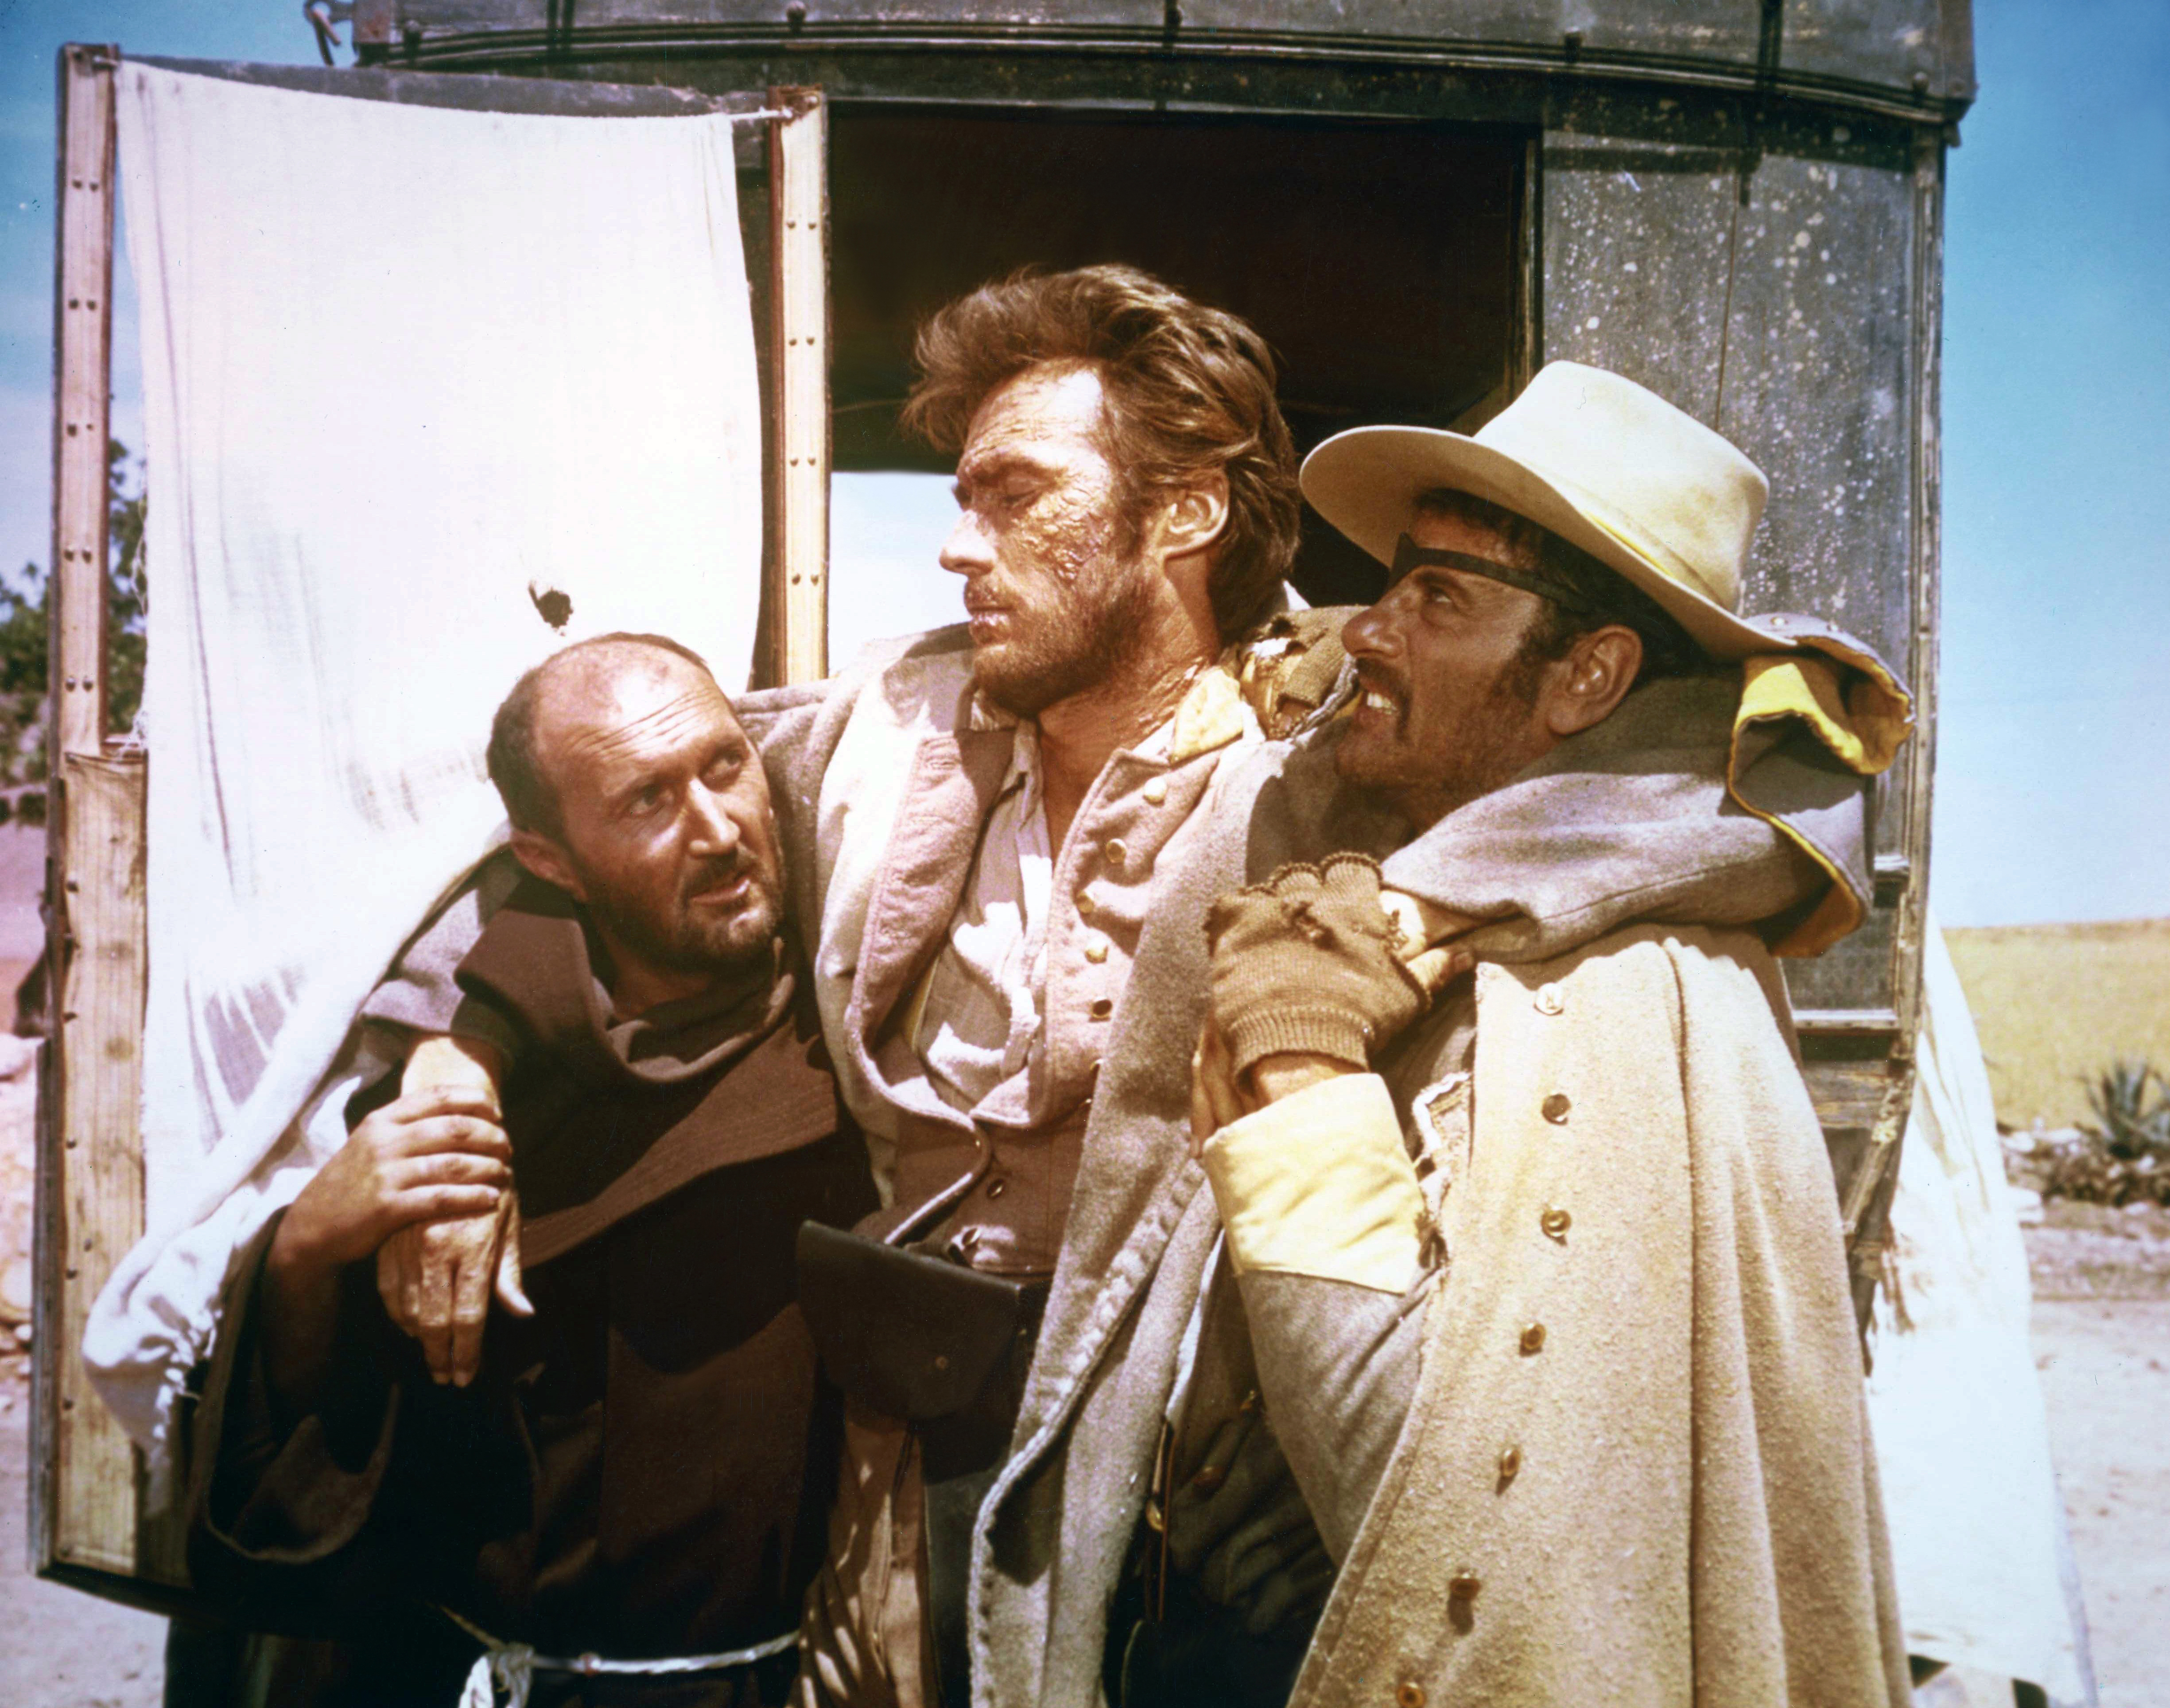 Clint Eastwood and Eli Wallach in The Good, the Bad and the Ugly (1966)